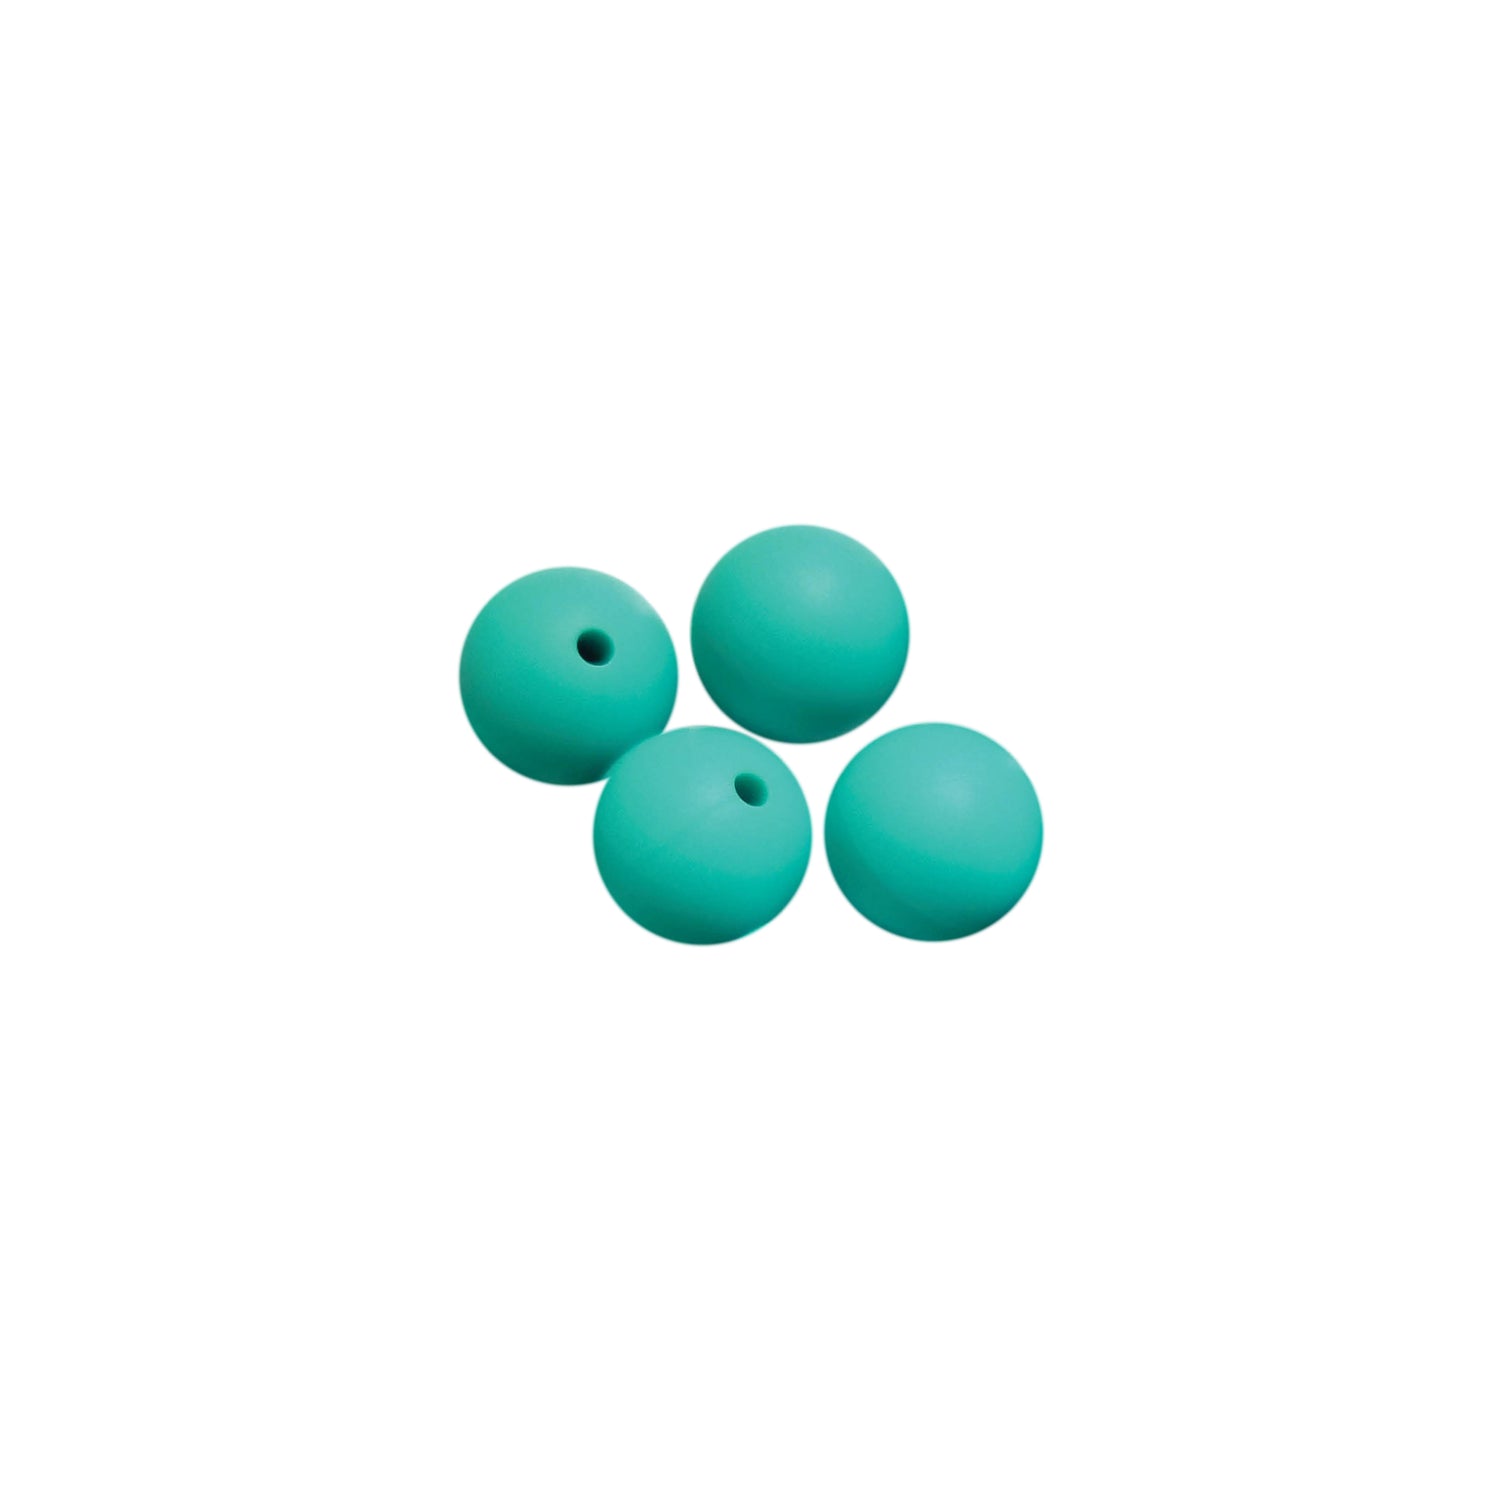 15mm turquoise round silicone beads